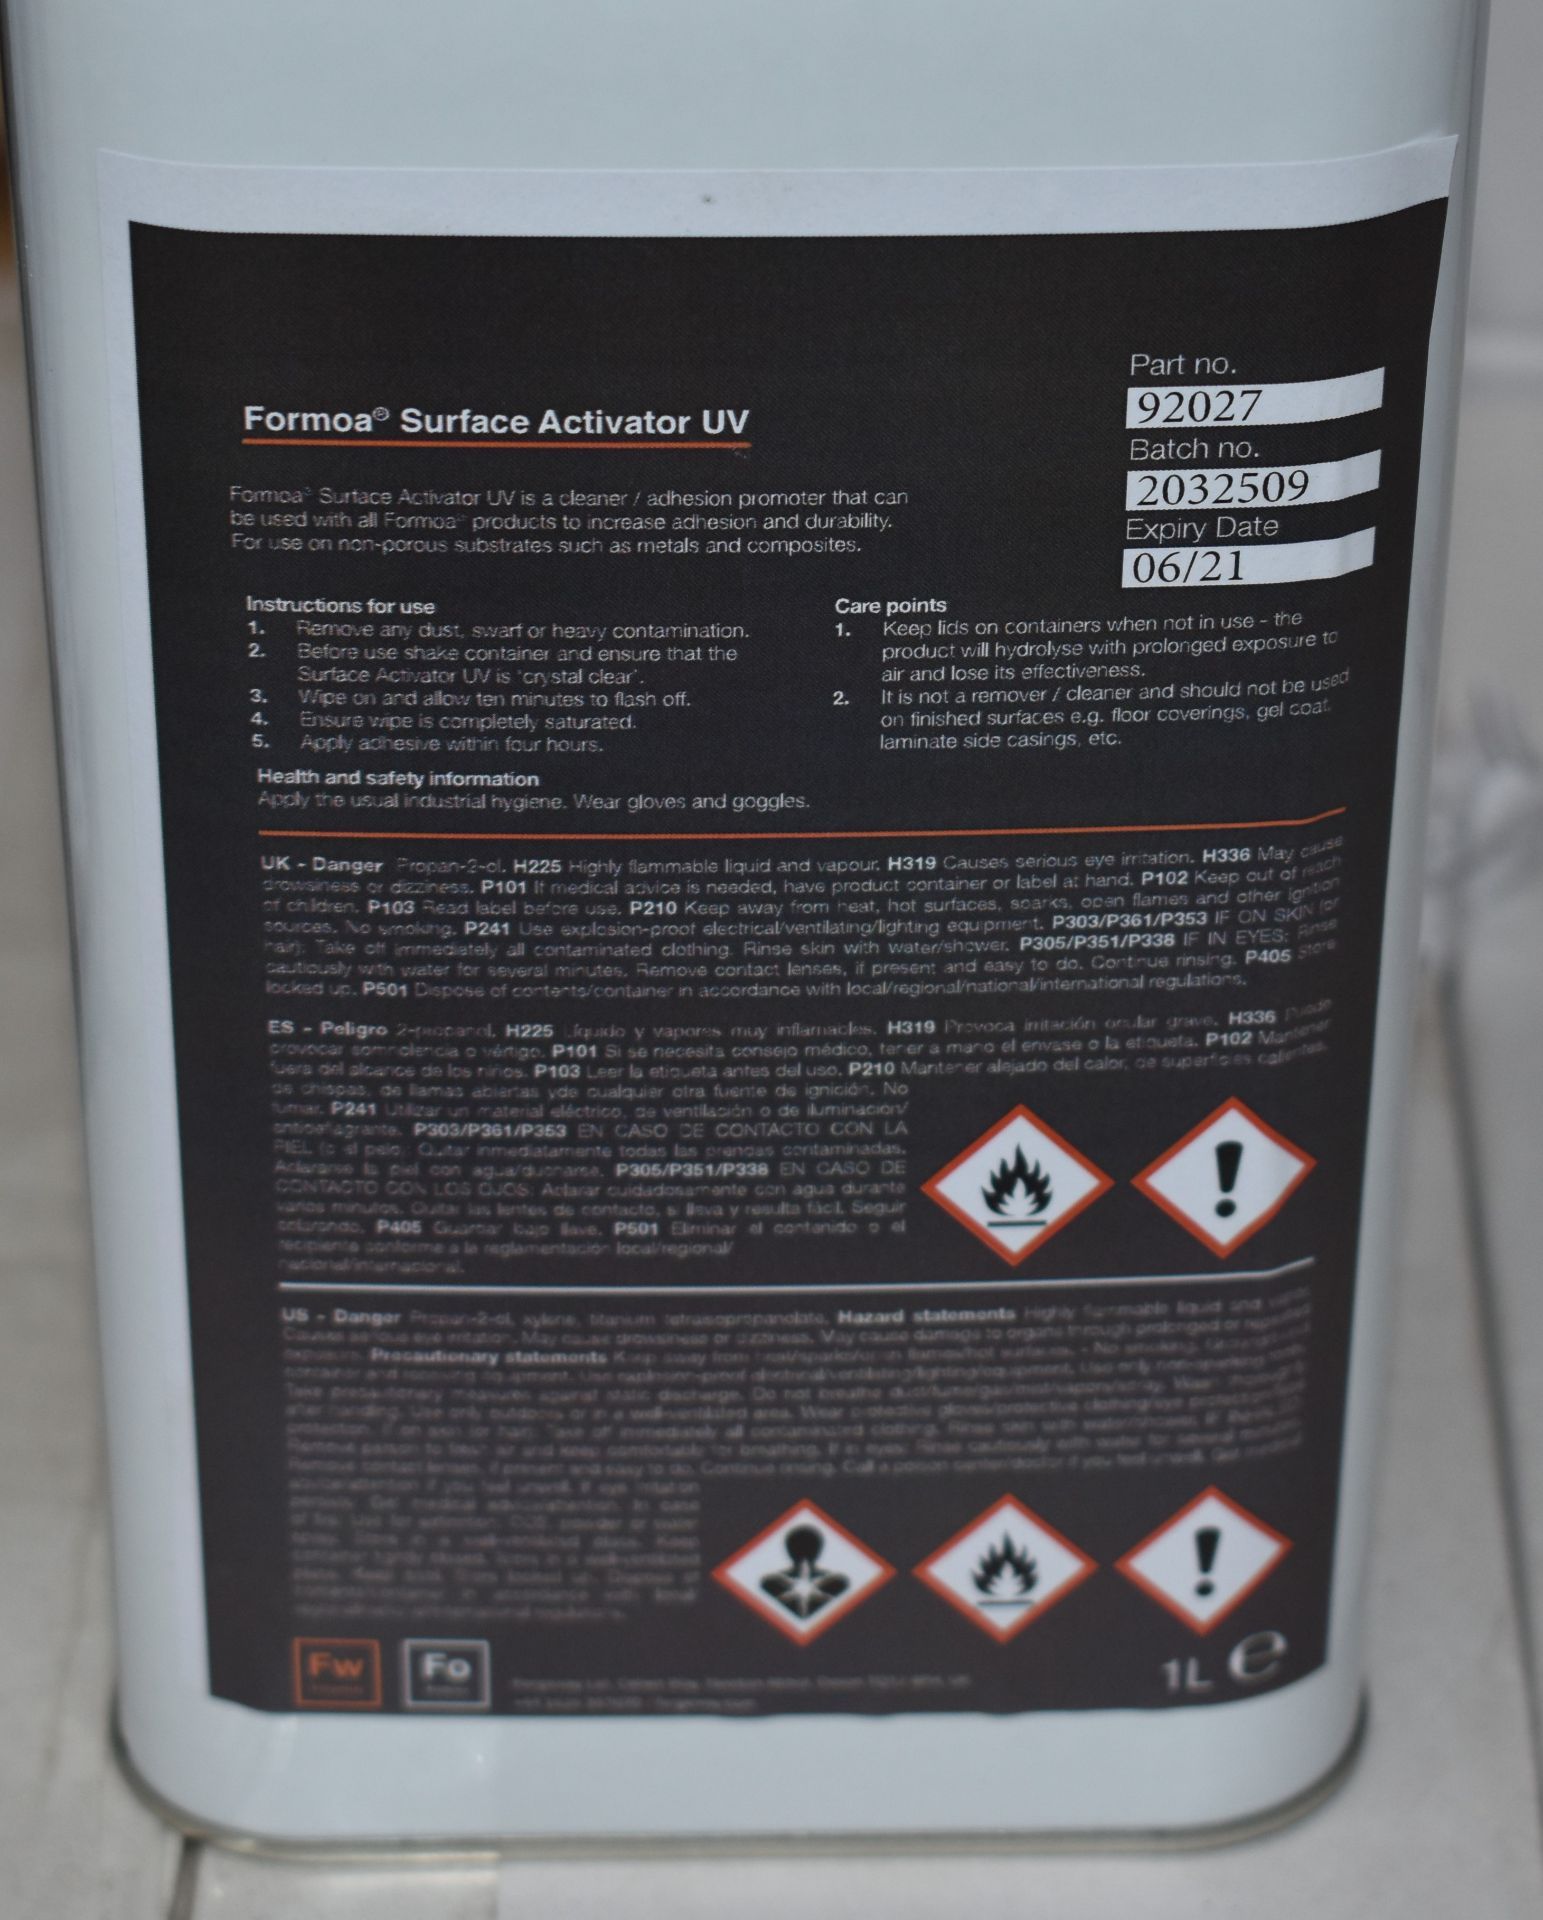 36 x Forgeway Formoa Surface Activator 1 Litre Containers - Adhesion Promotor, Cleaner, Degreaser - Image 2 of 6